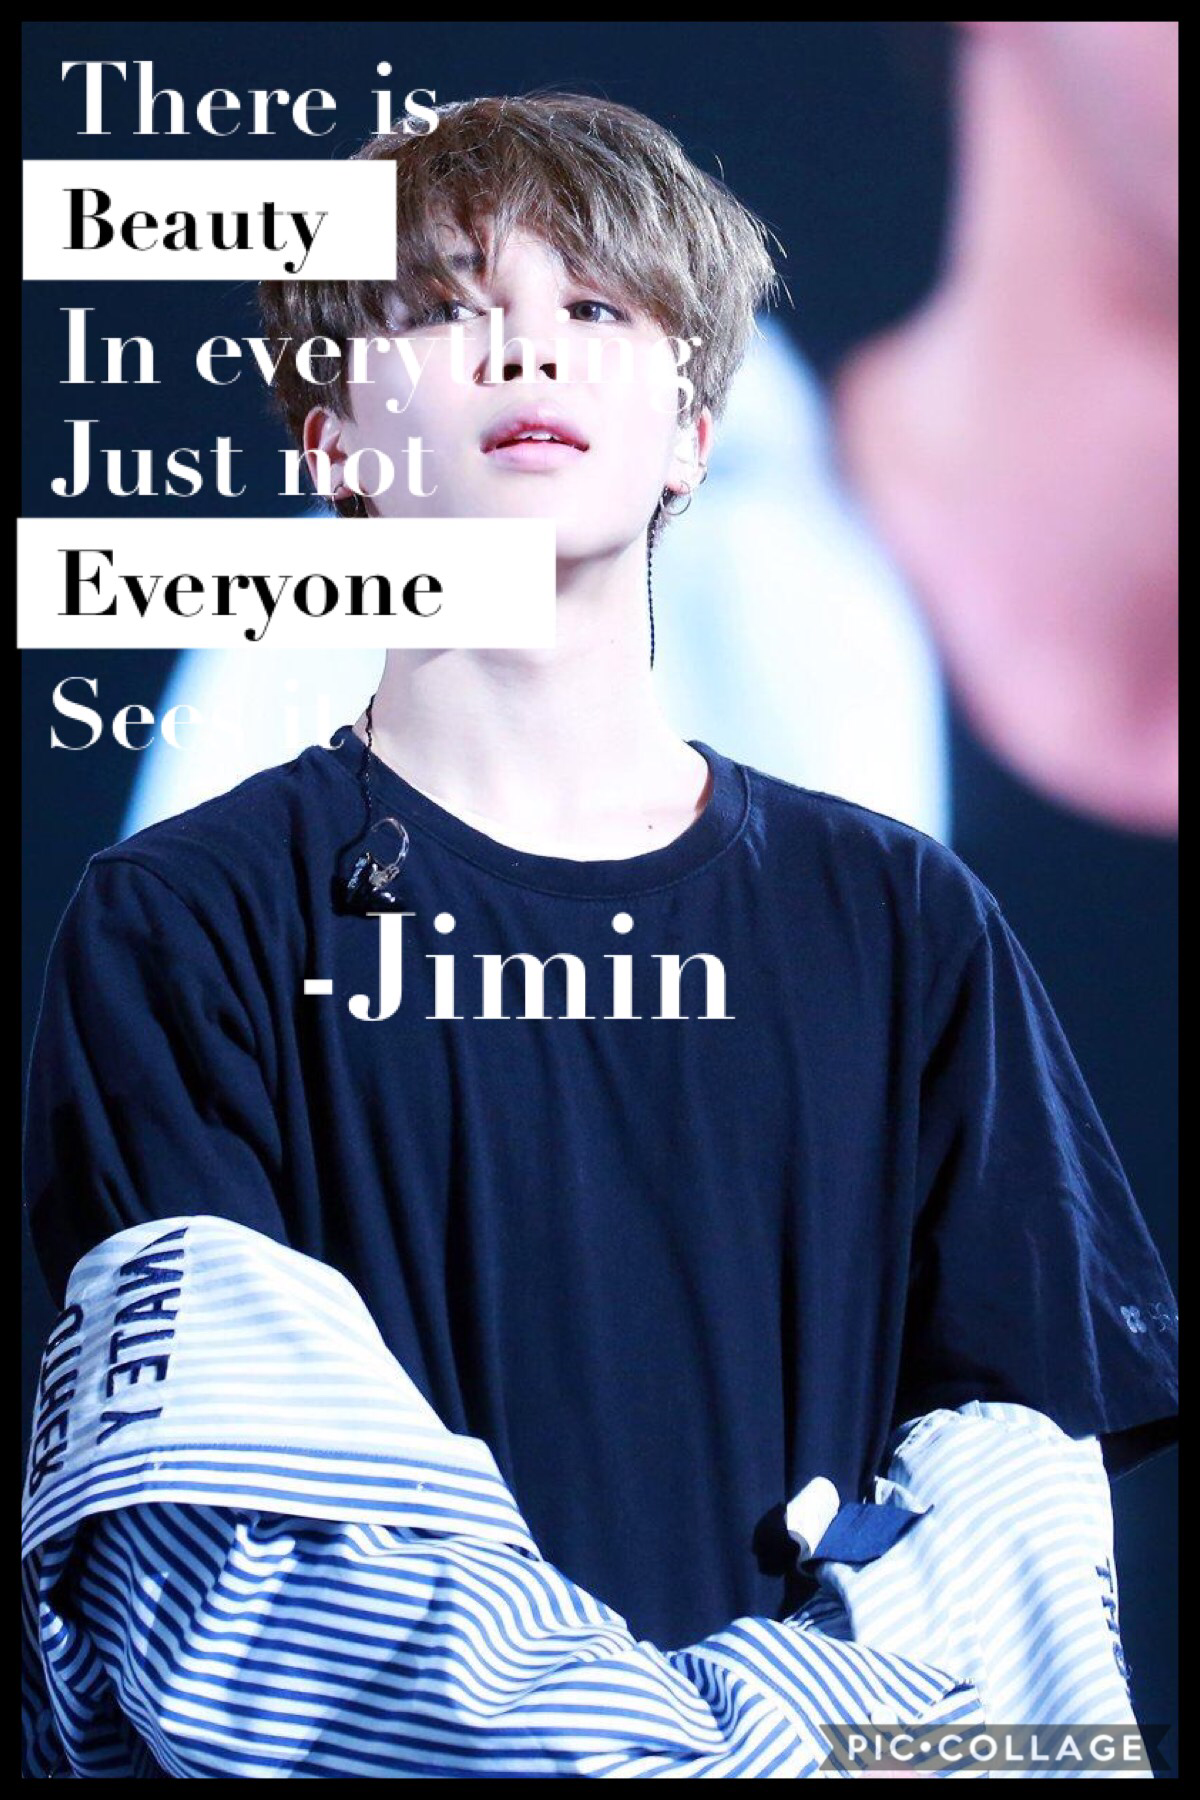 Jimin quote is here